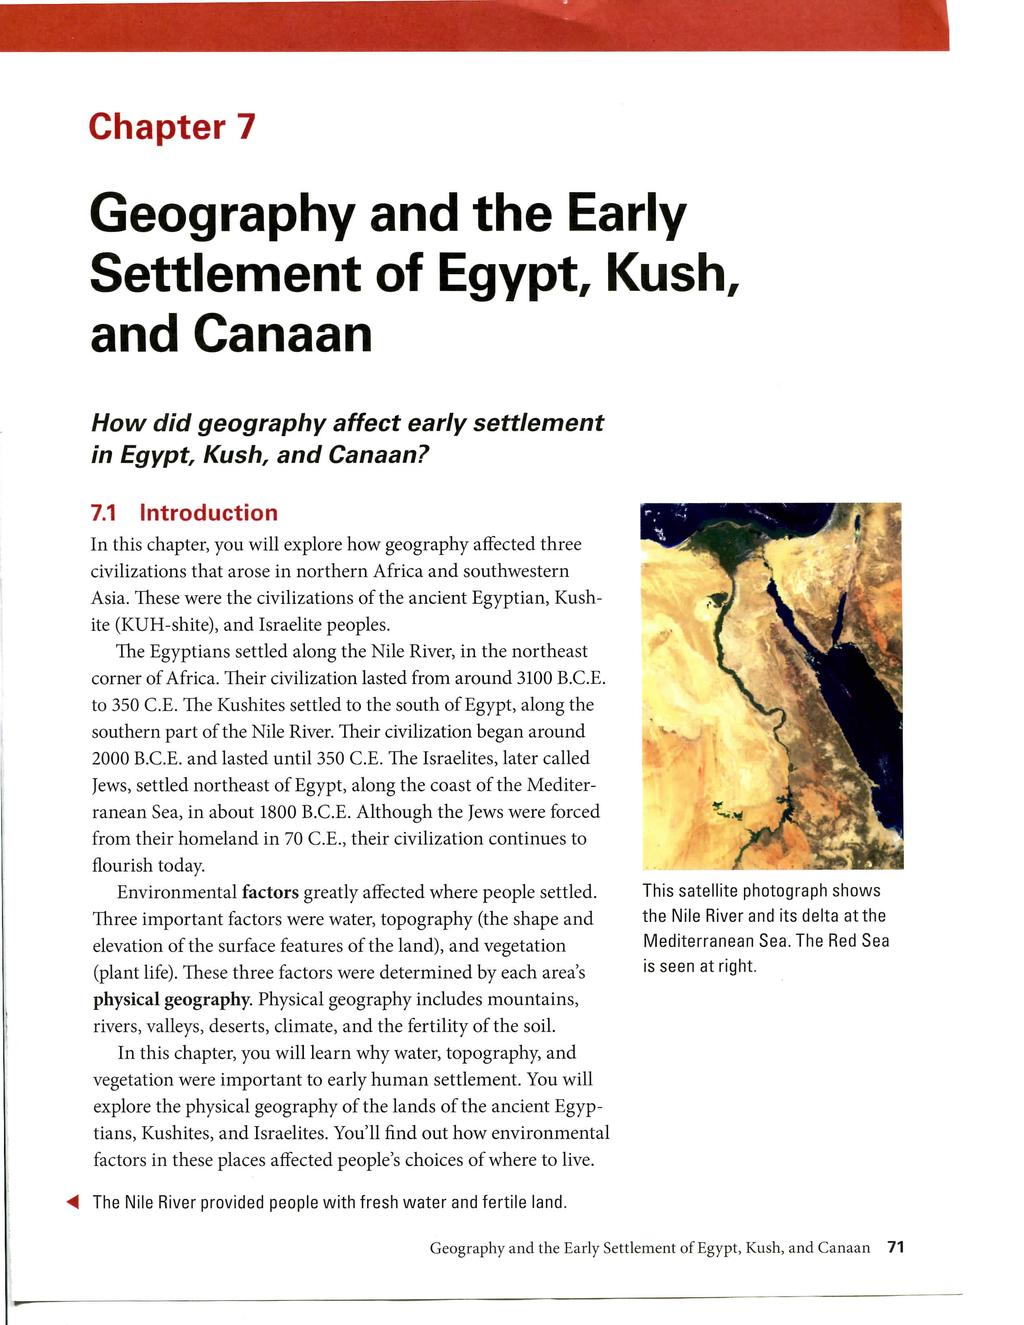 Chapter 7 Geography and the Early Settlement of Egypt, Kush, and Canaan How did geography affect early in Egypt Kush, and Canaan? settlement 7.